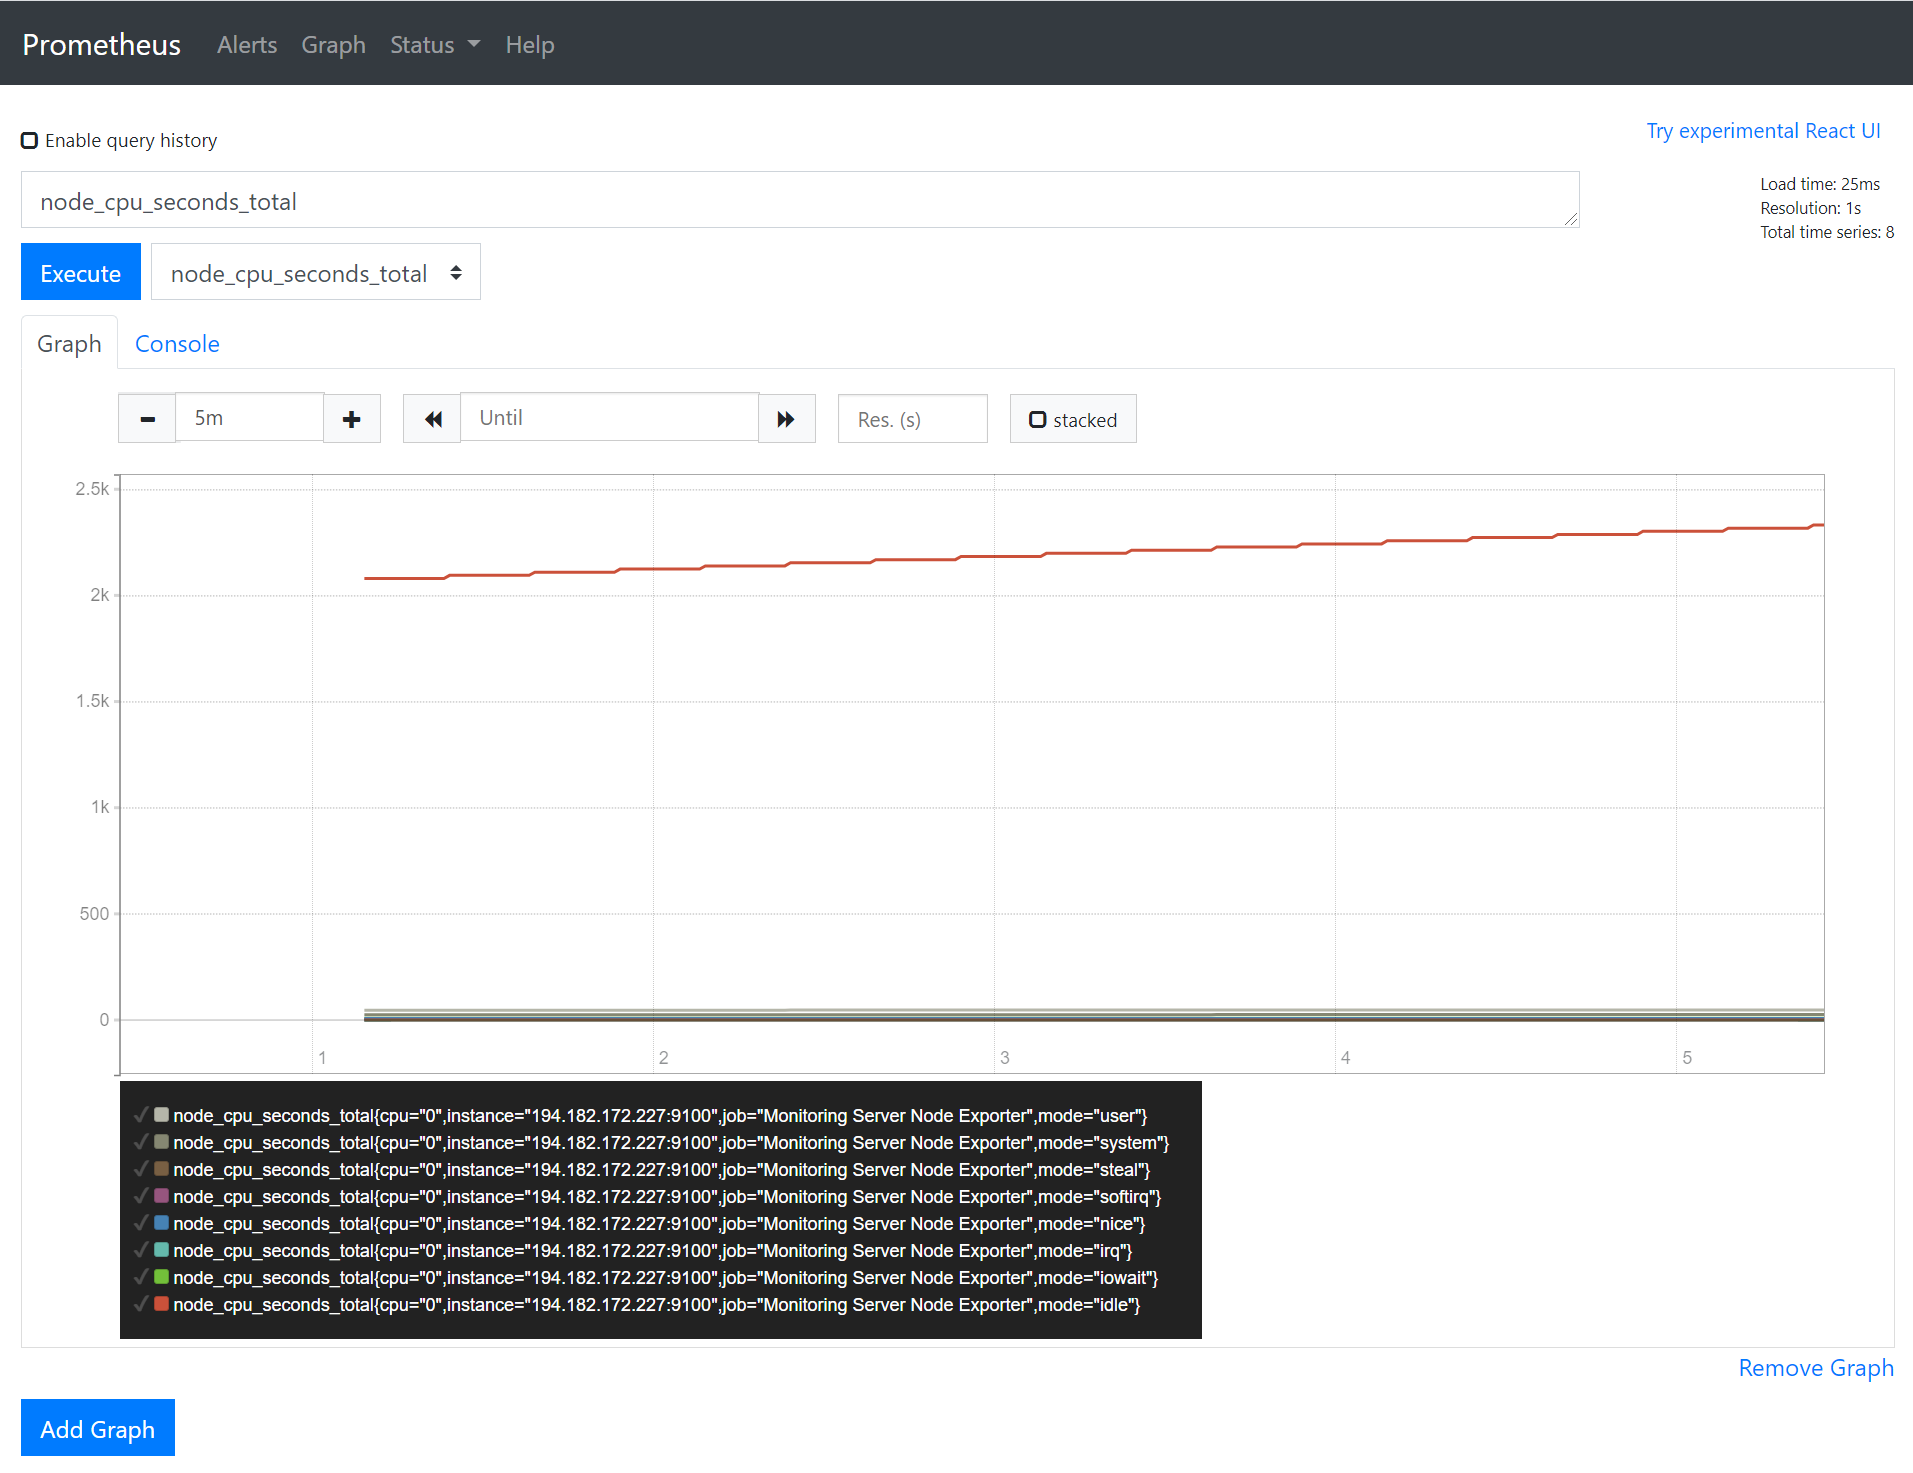 A screenshot of Prometheus showing the CPU usage. This results in several metrics called user, system, steal, etc.